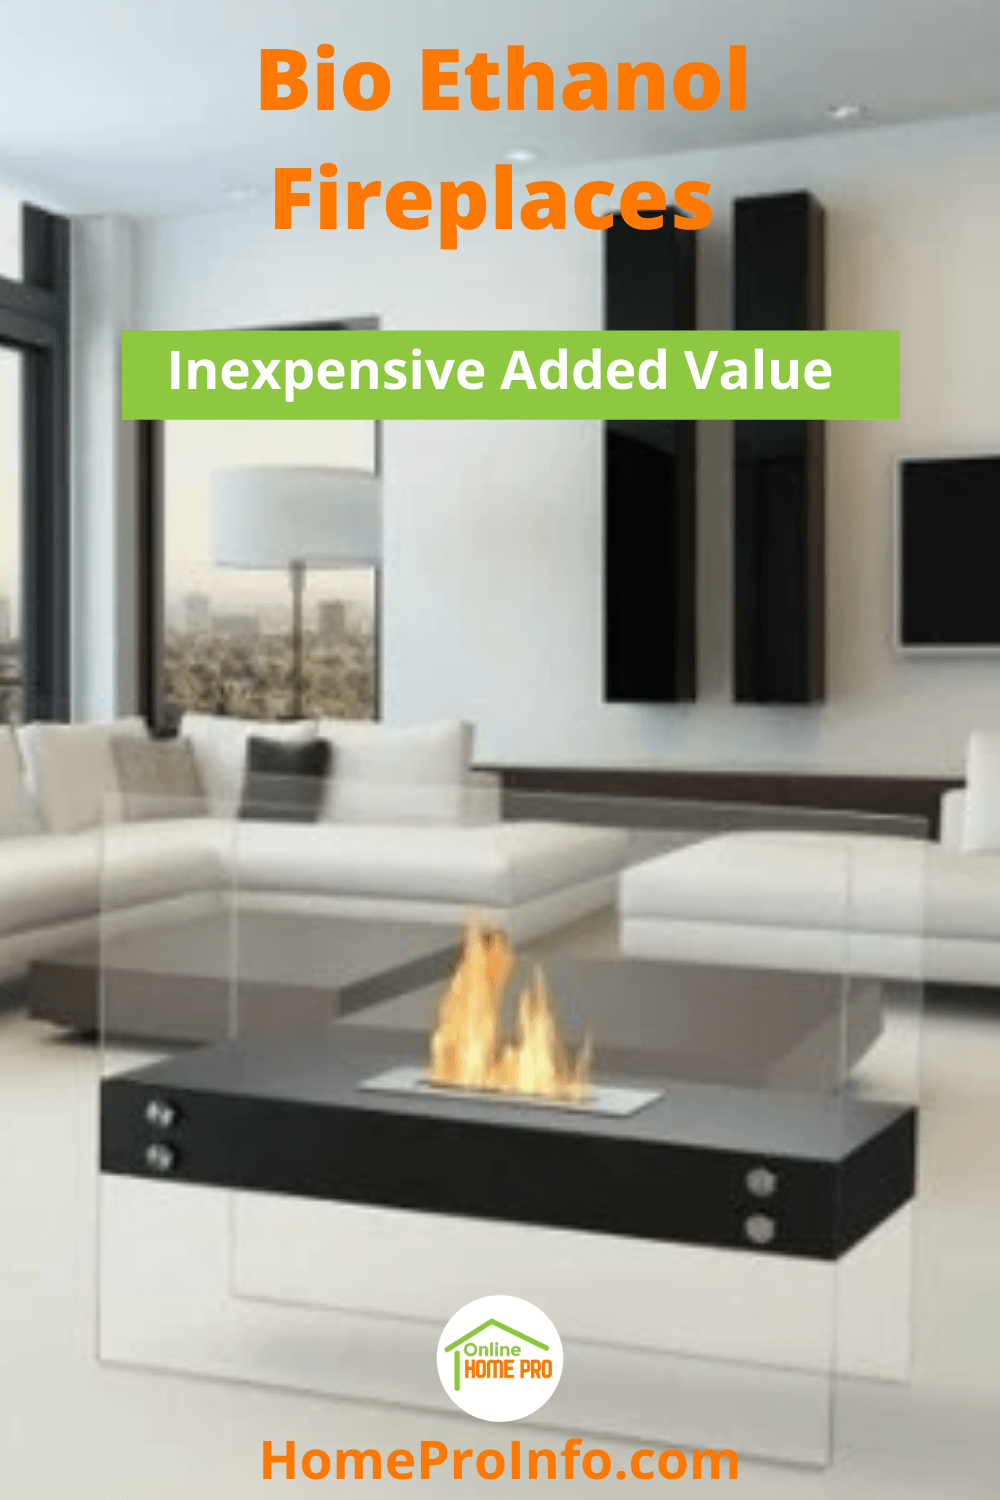 bio ethanol fireplaces for inexpensive added value